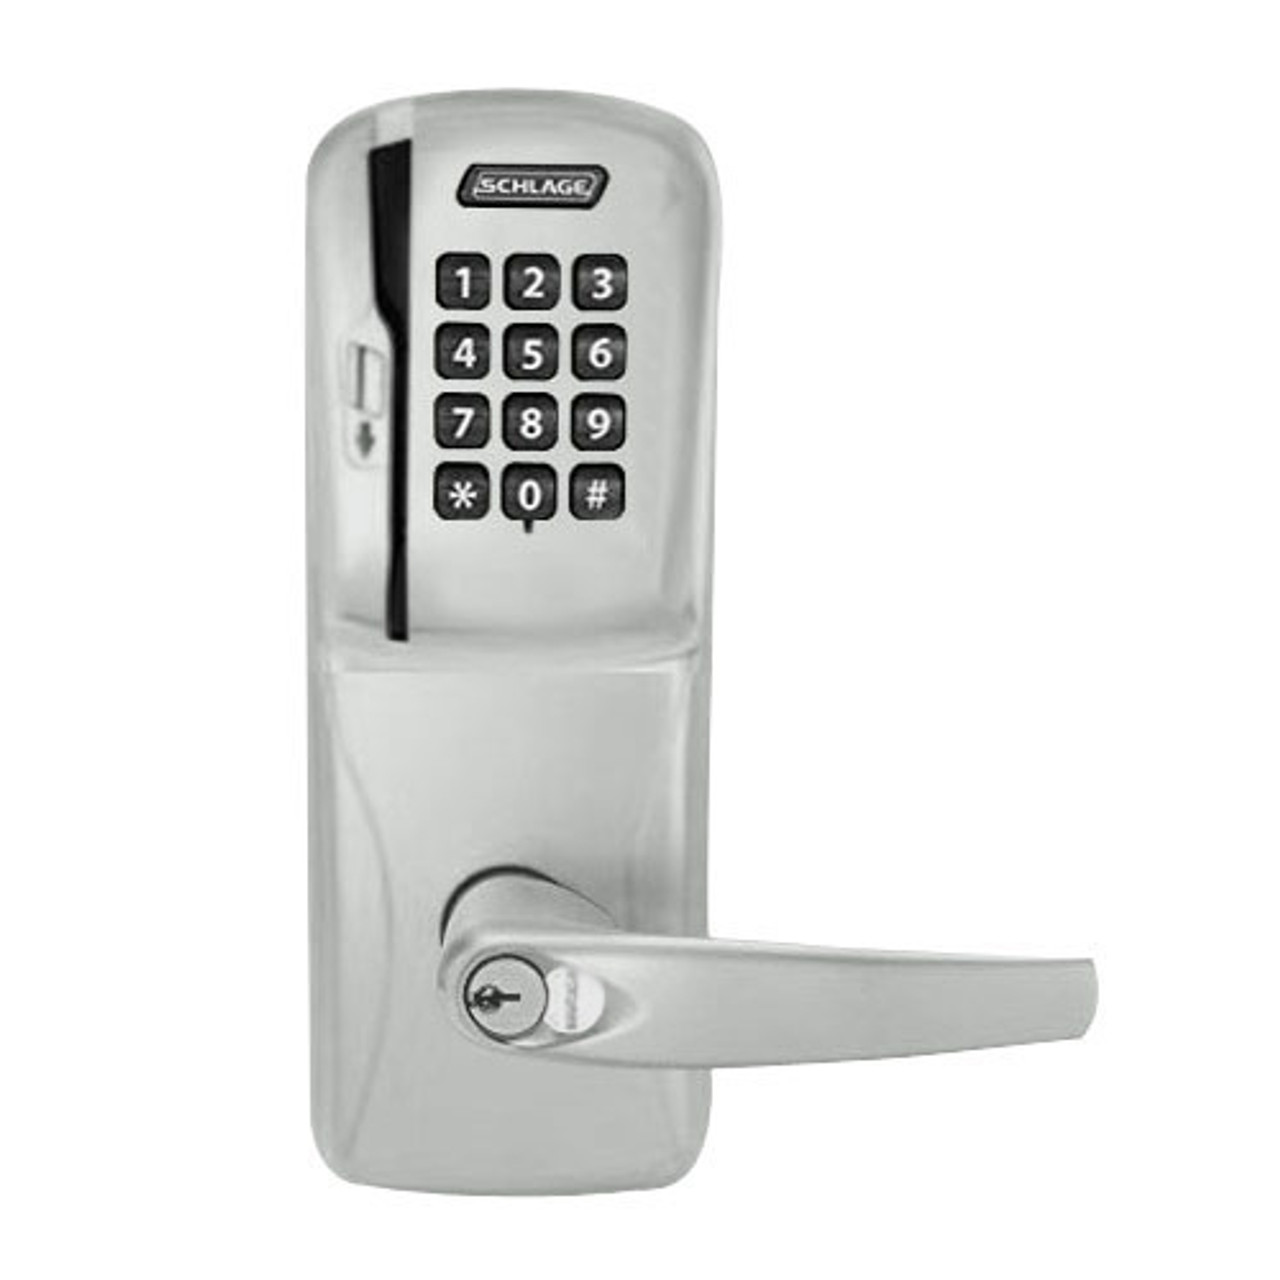 CO200-MD-40-MSK-ATH-RD-619 Mortise Deadbolt Standalone Electronic Magnetic Stripe with Keypad Locks in Satin Nickel